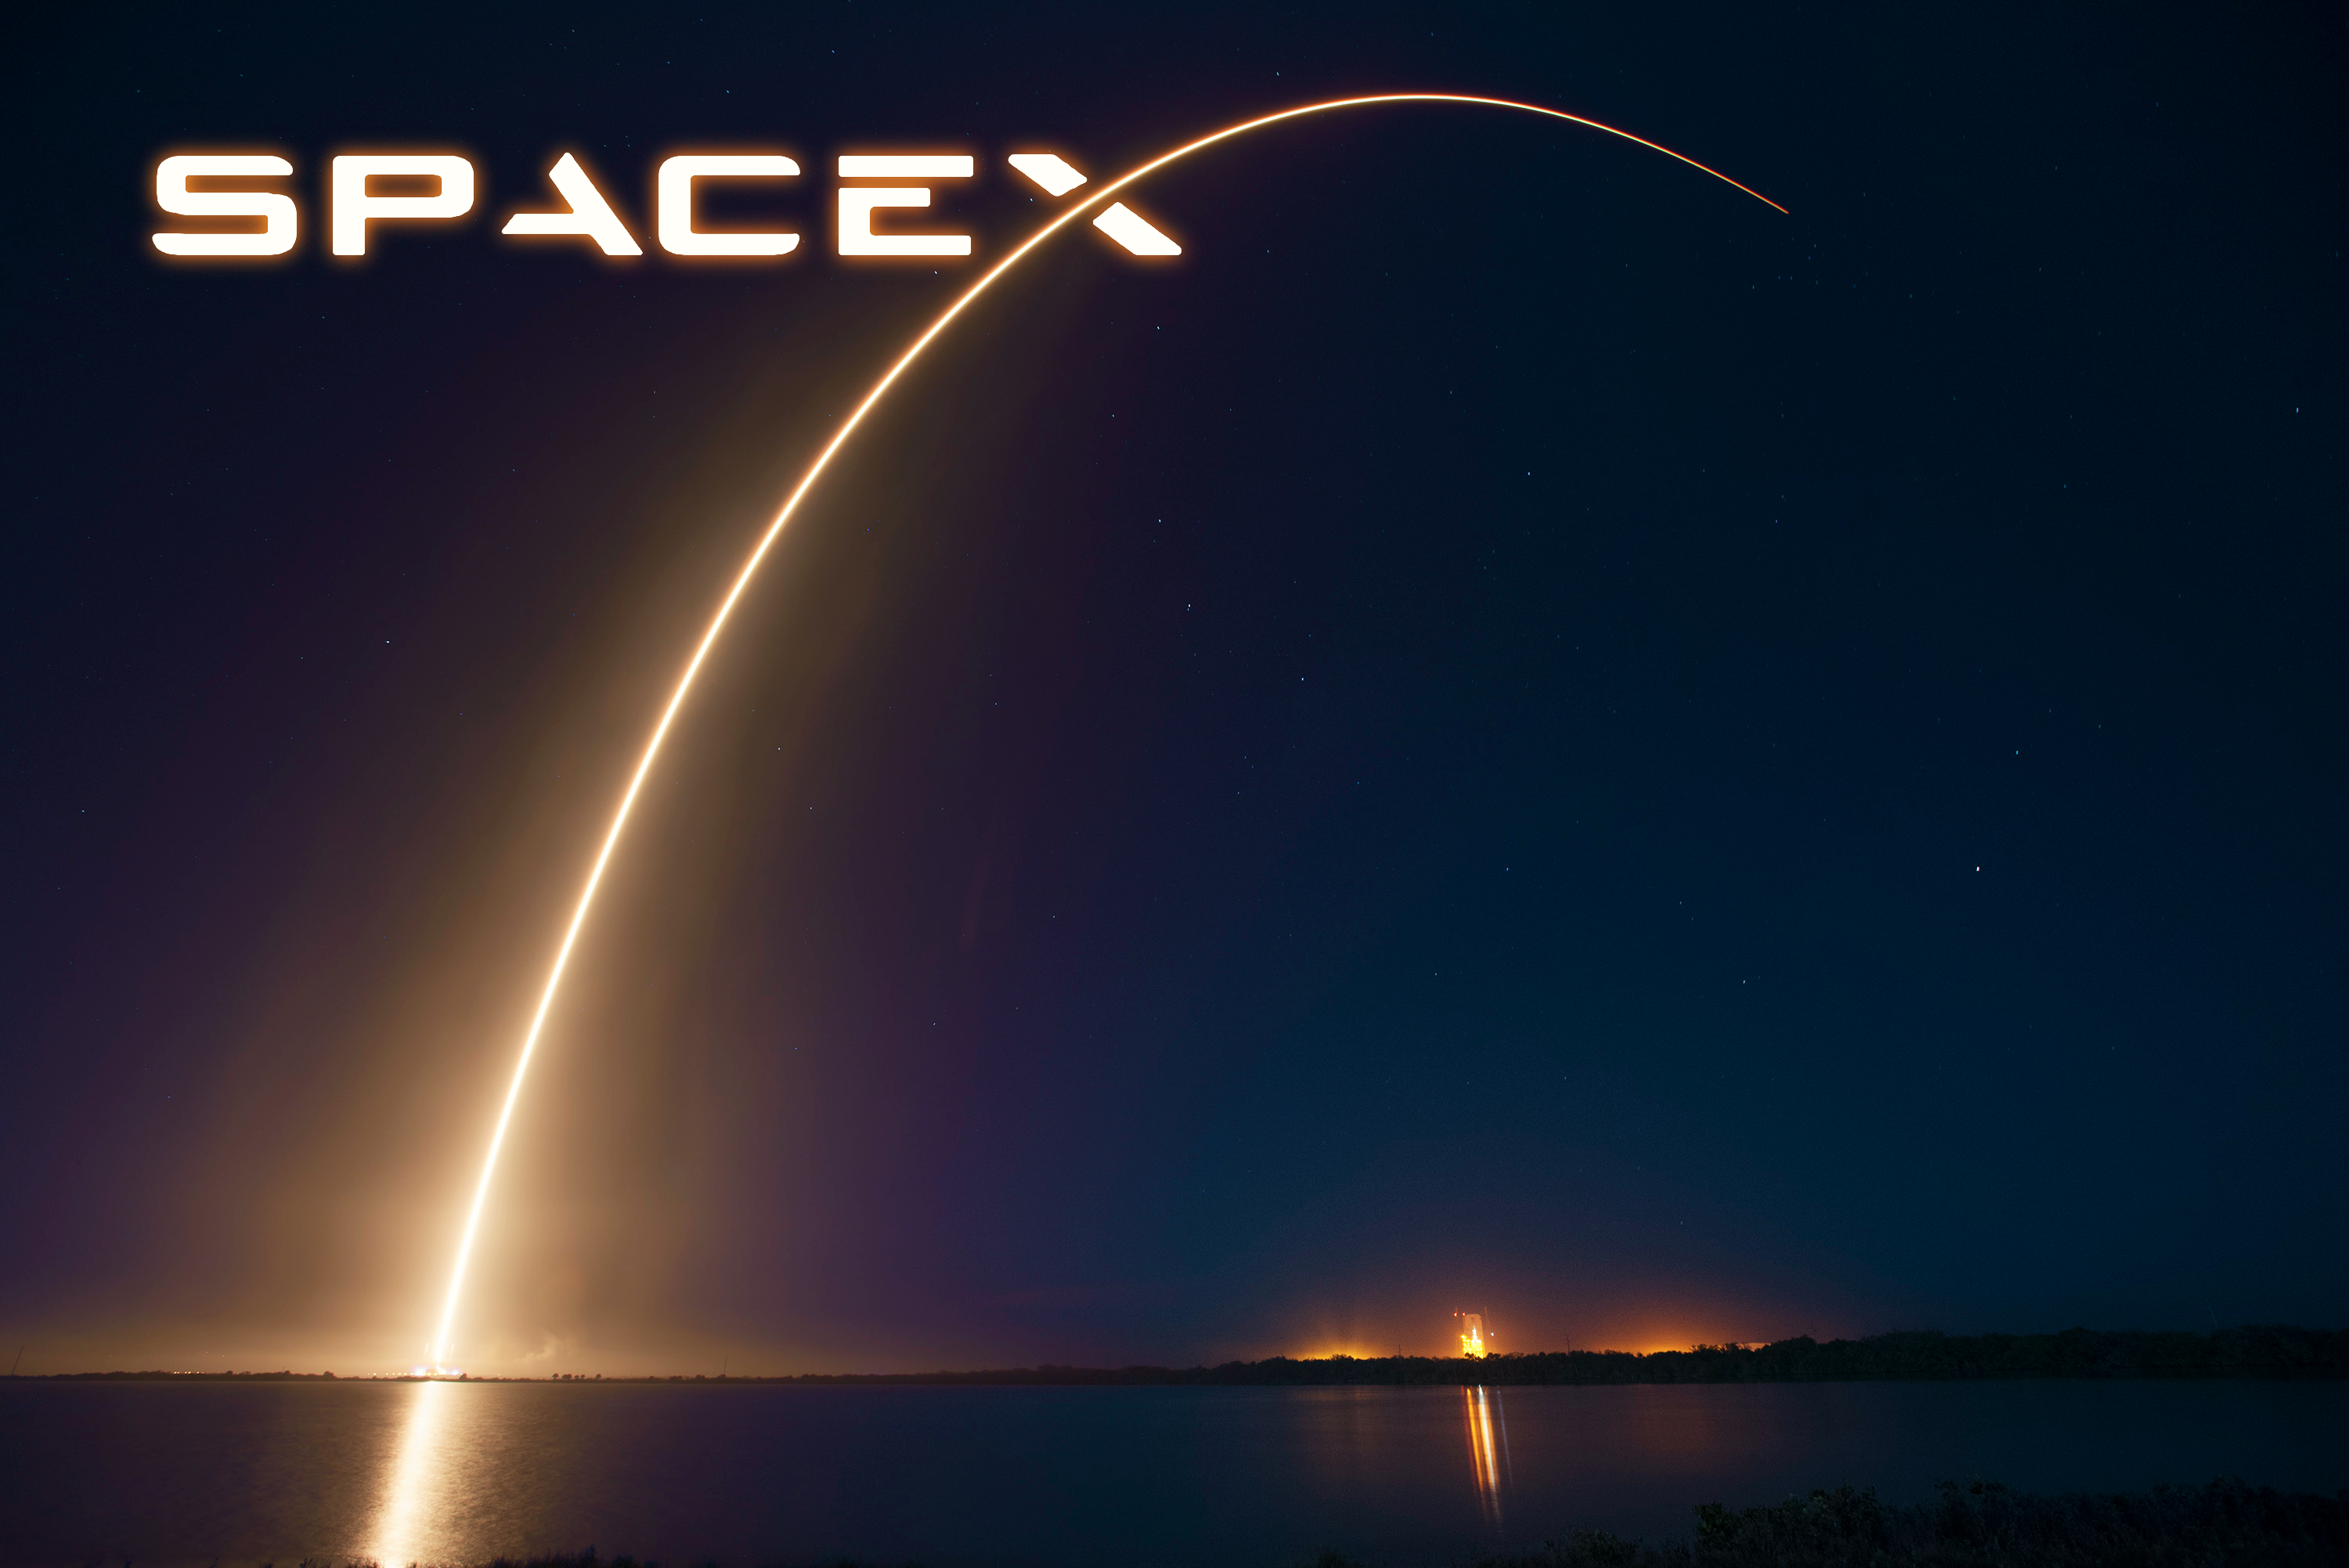 Amazing SpaceX Pictures & Backgrounds